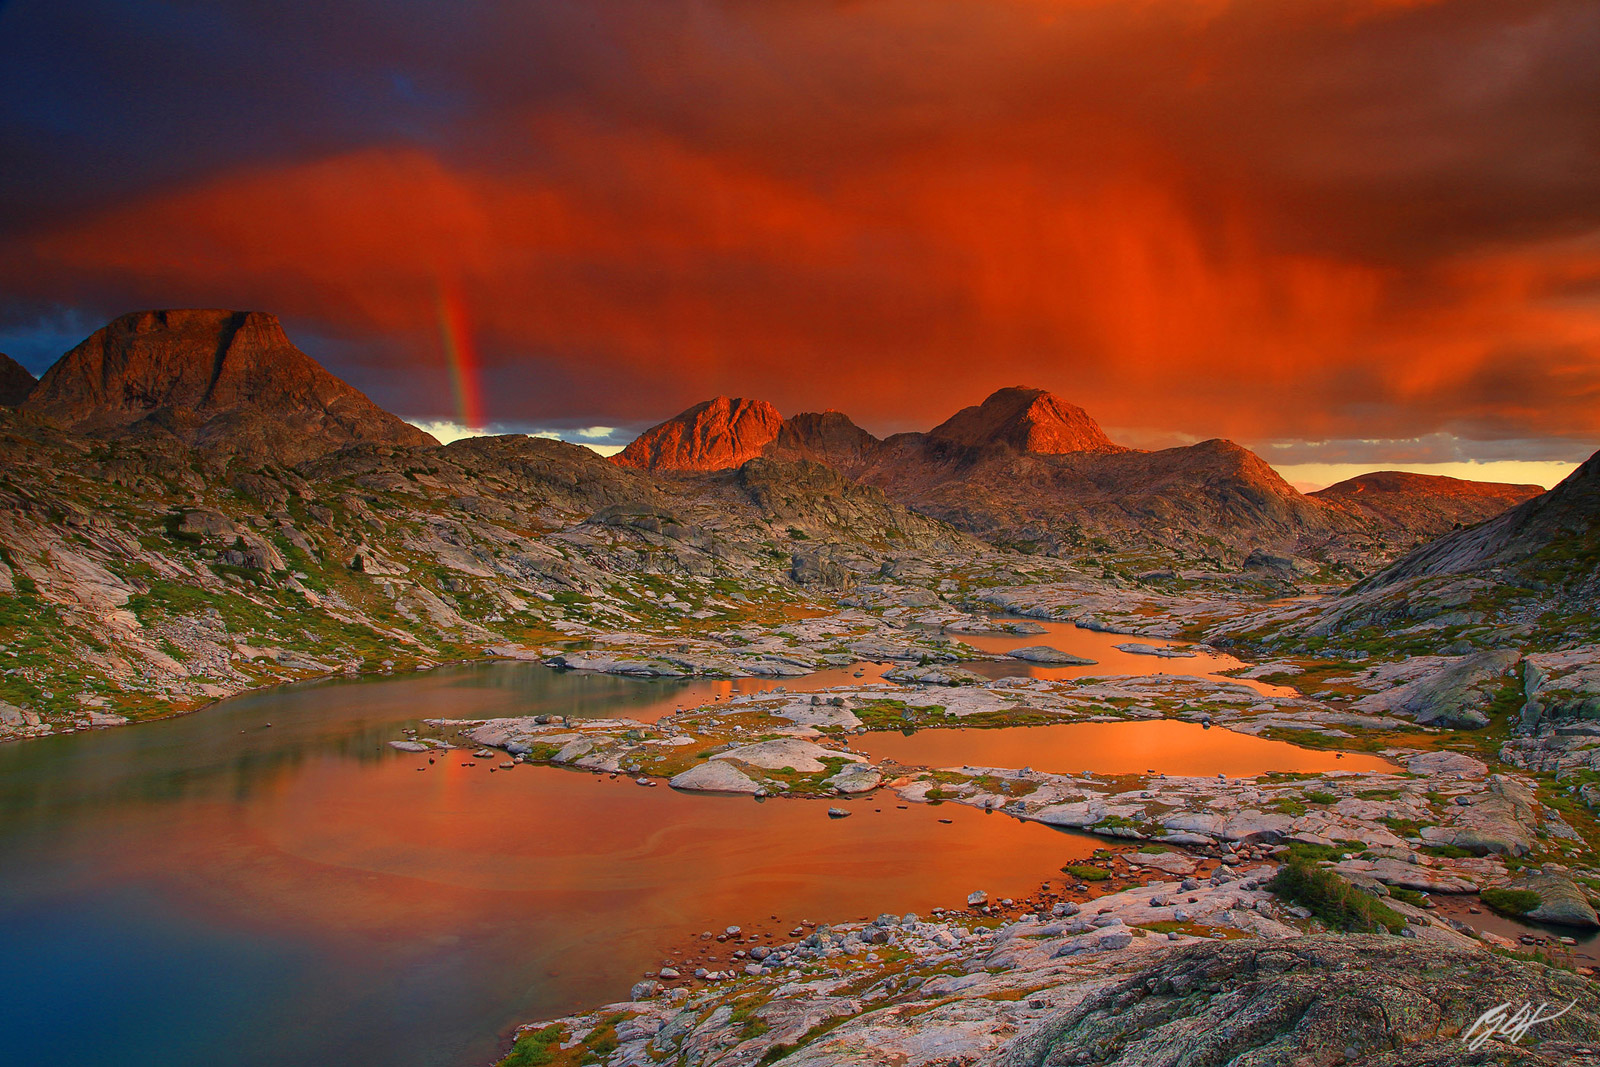 Sunset on Raincloud in the Titcomb Lakes Basin in the Wind Rivers Range in Wyoming